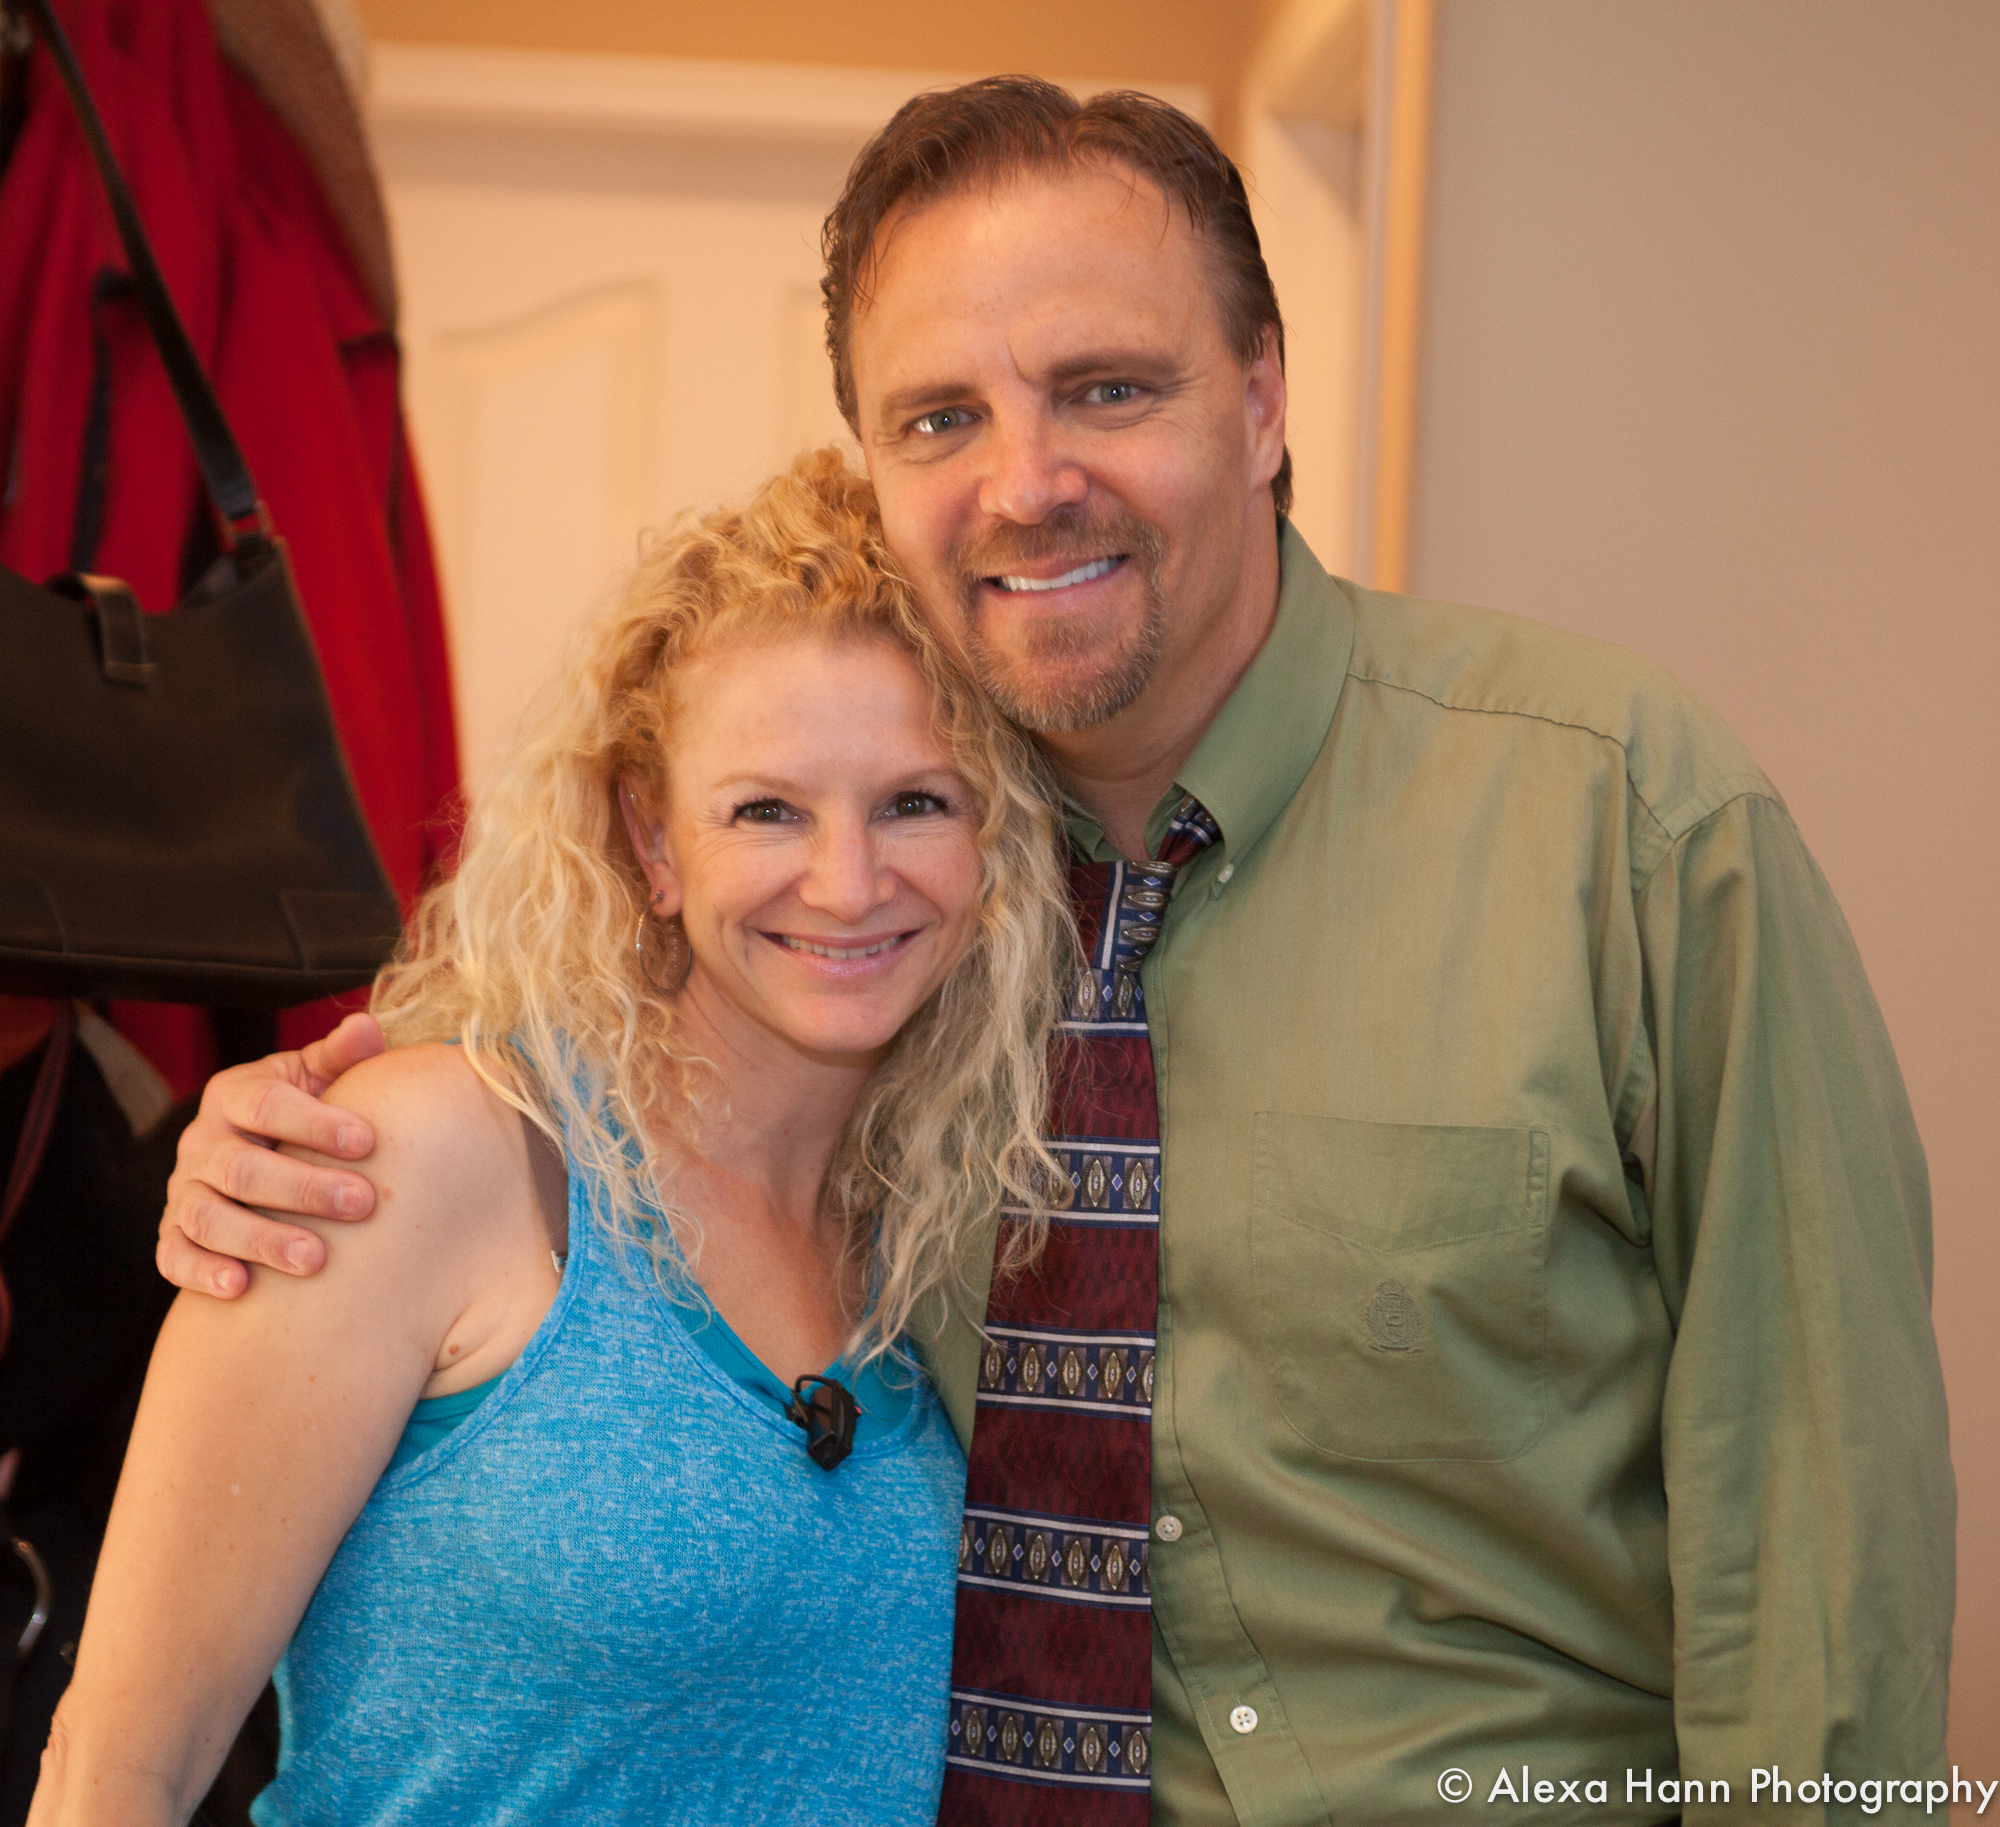 Michael Gier on set with his producing partner and wife, Terri Gier.